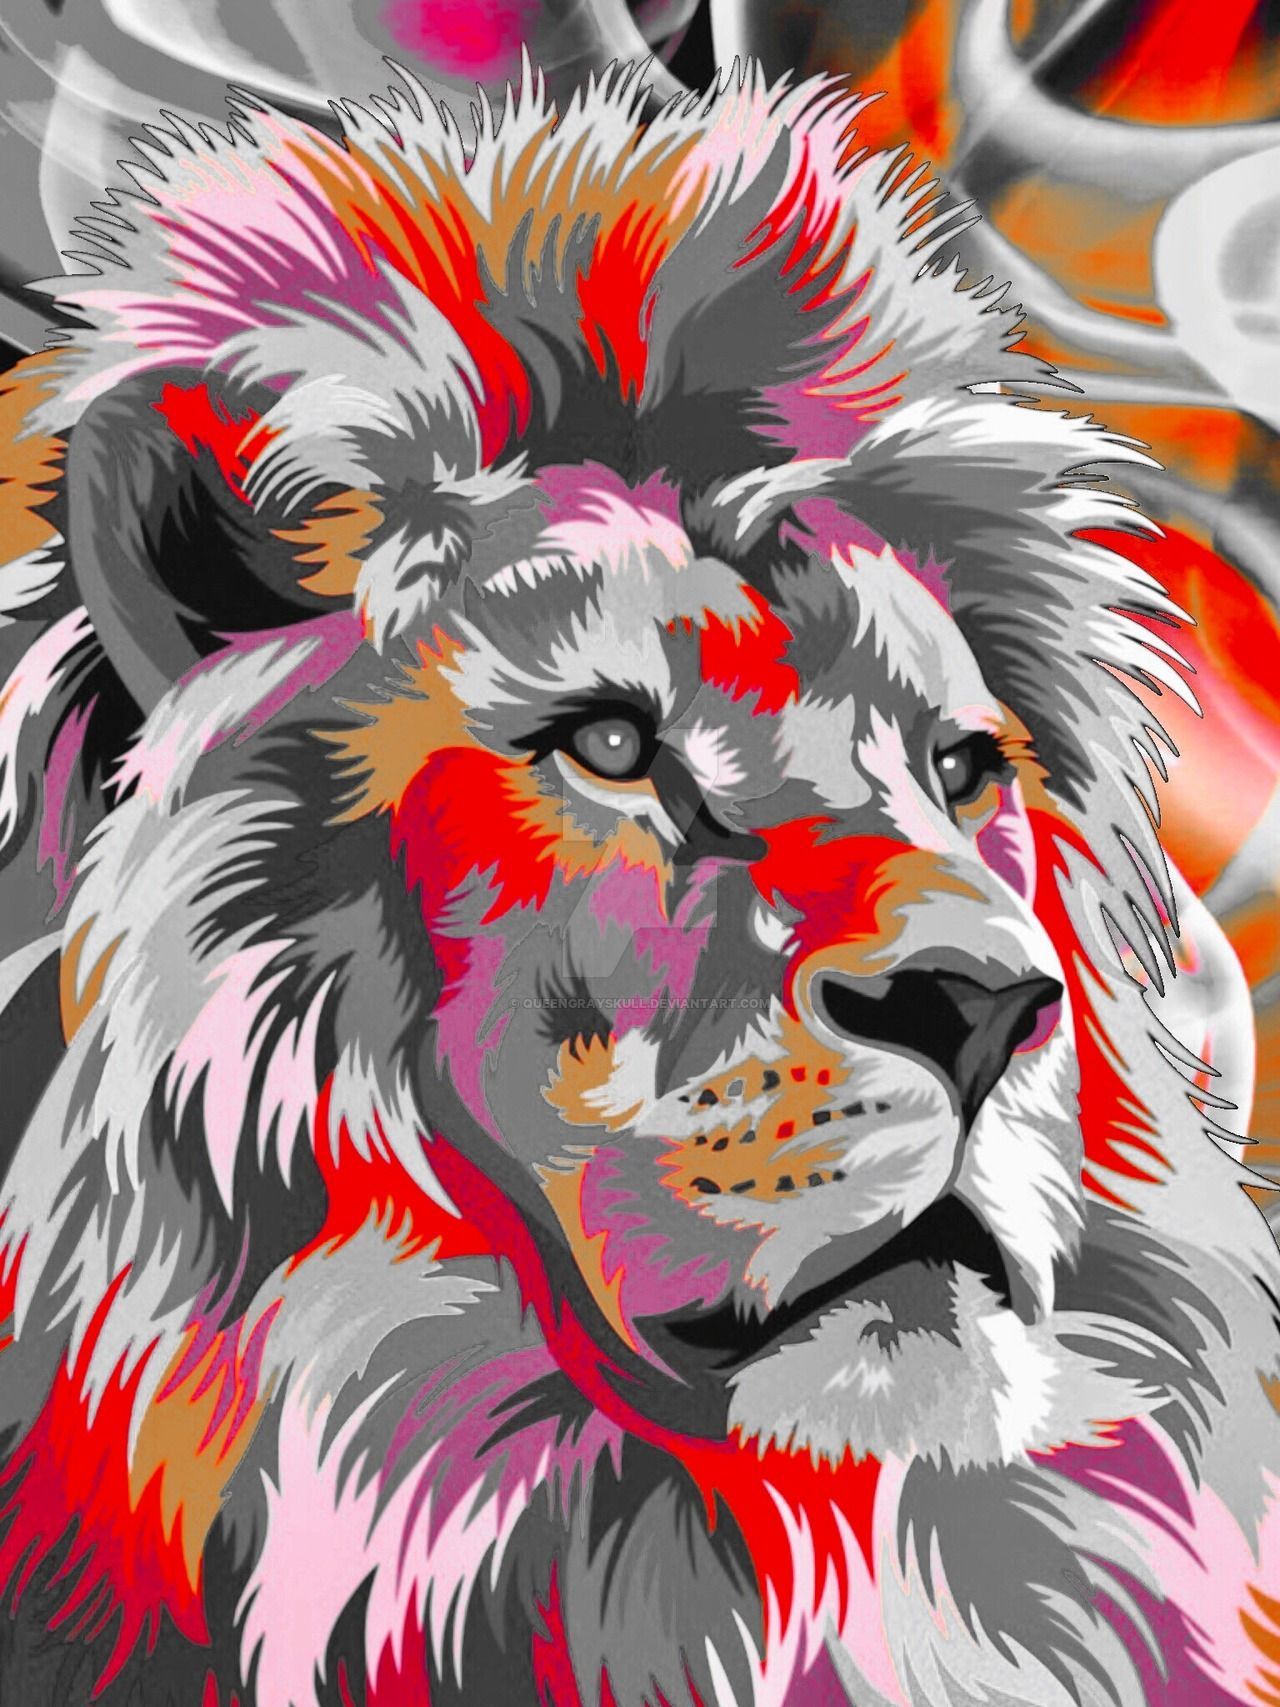 Red Lion by queengrayskull. Lion painting, Lion art, Pop art image